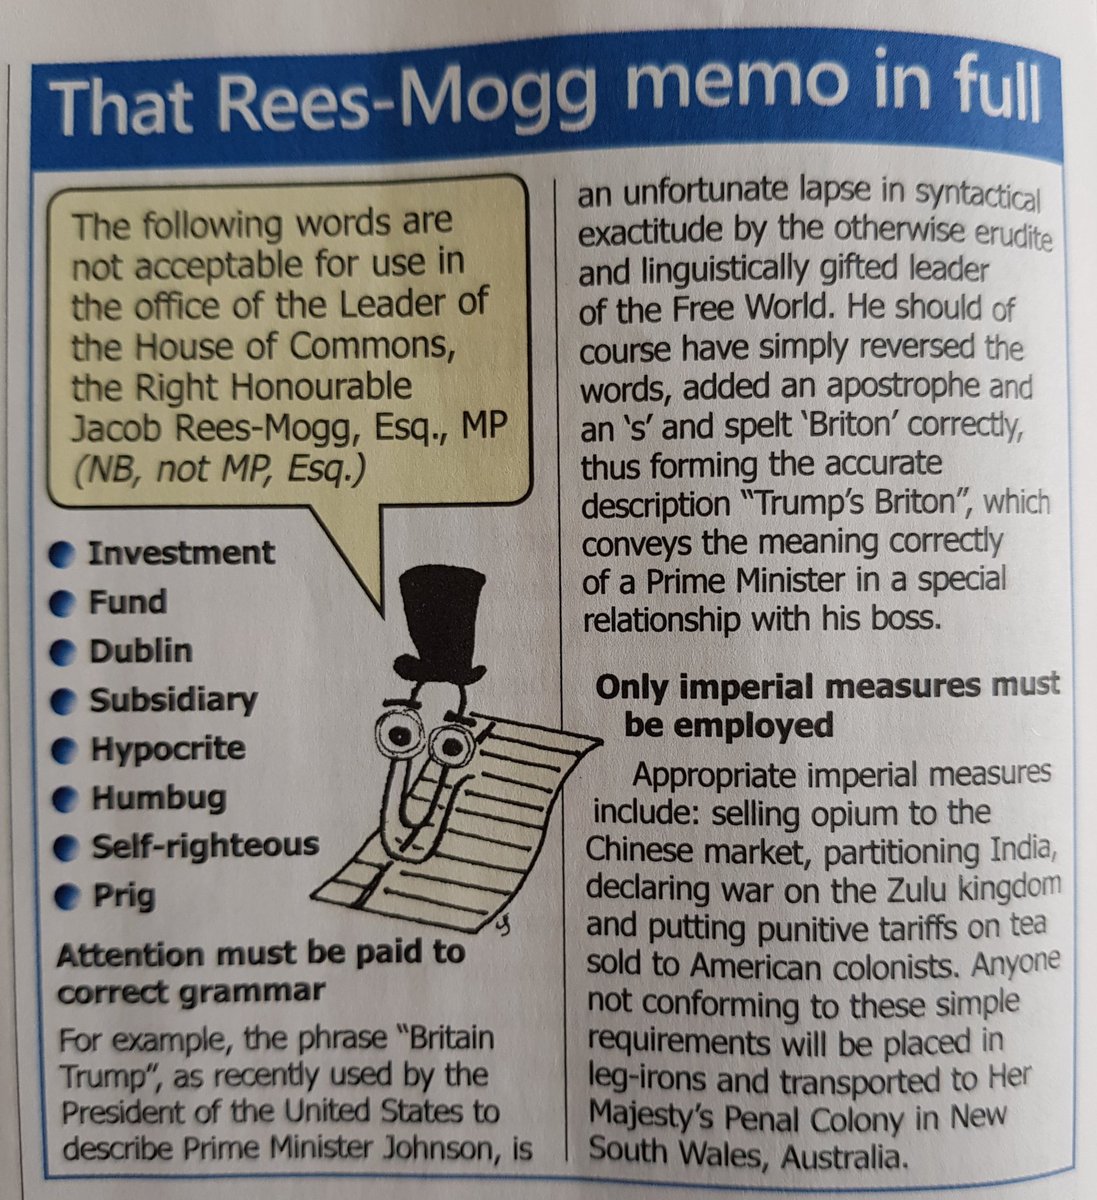  Have we reached "Peak Mogg" yet?